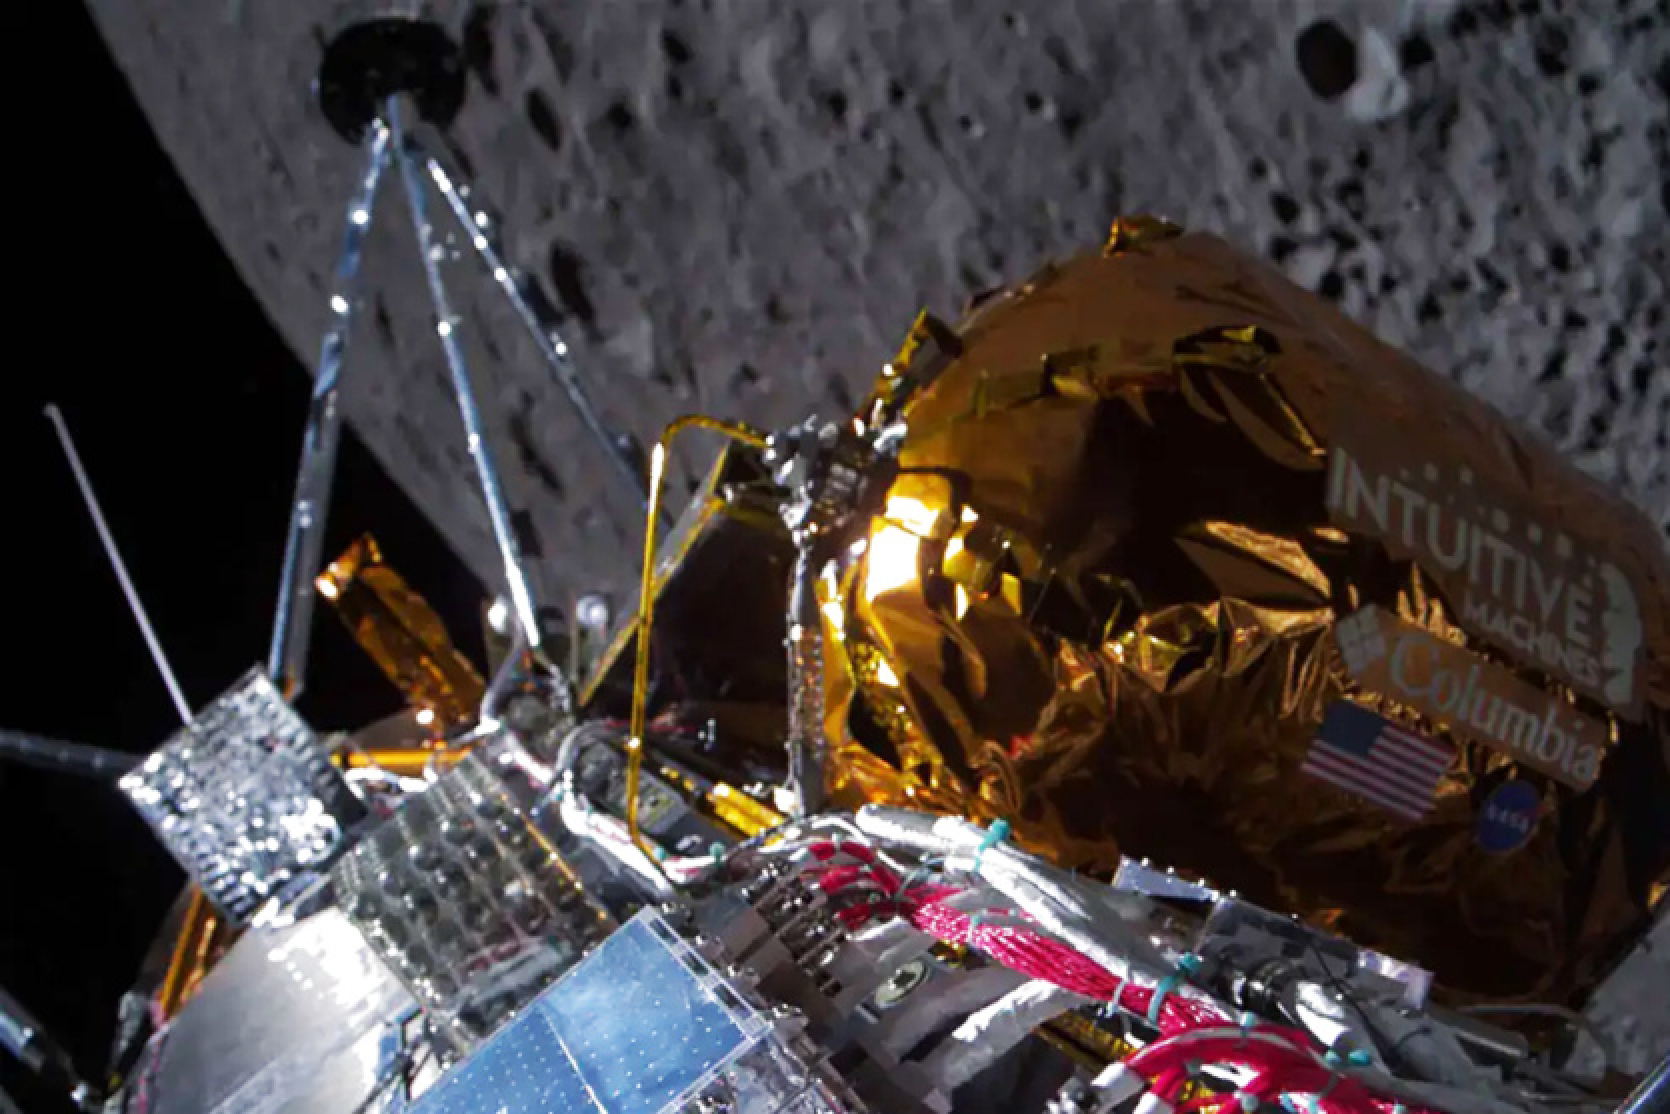 The Odysseus mission is about to run out of power, and Japan's first lunar module suddenly "woke up" after a two-week overnight stay